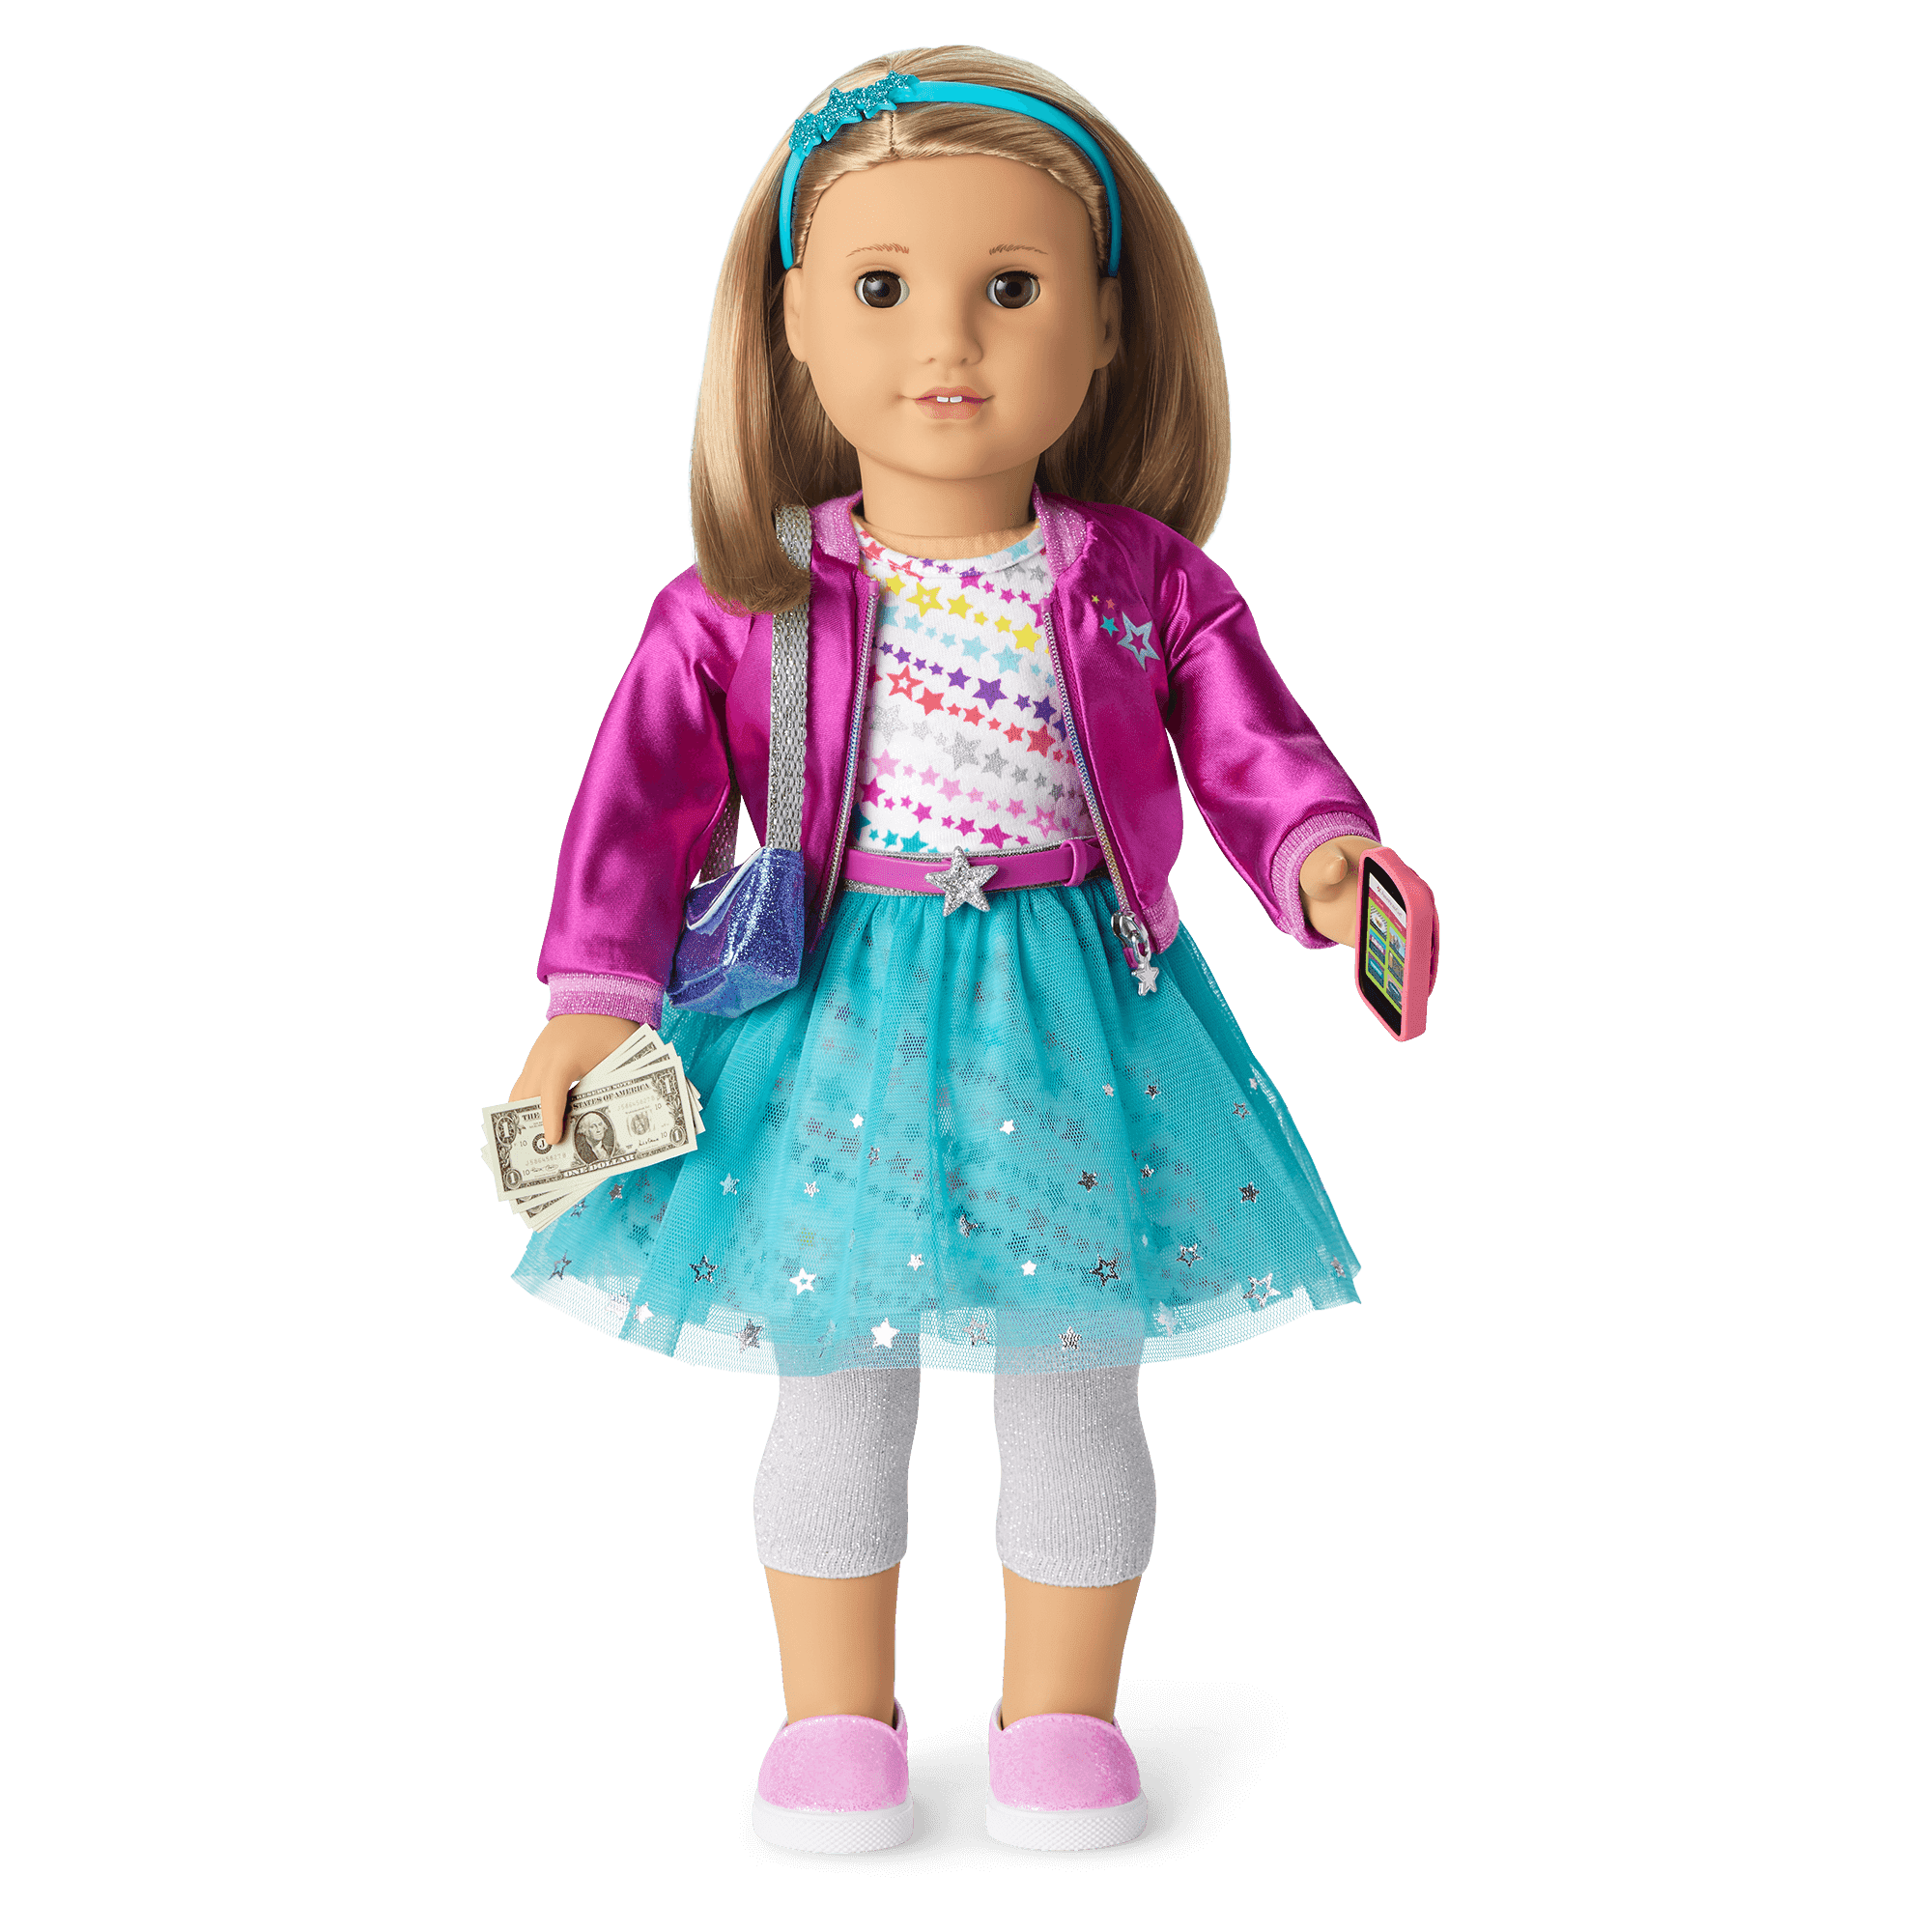 Sparkle & Shine Accessories for 18-inch Dolls